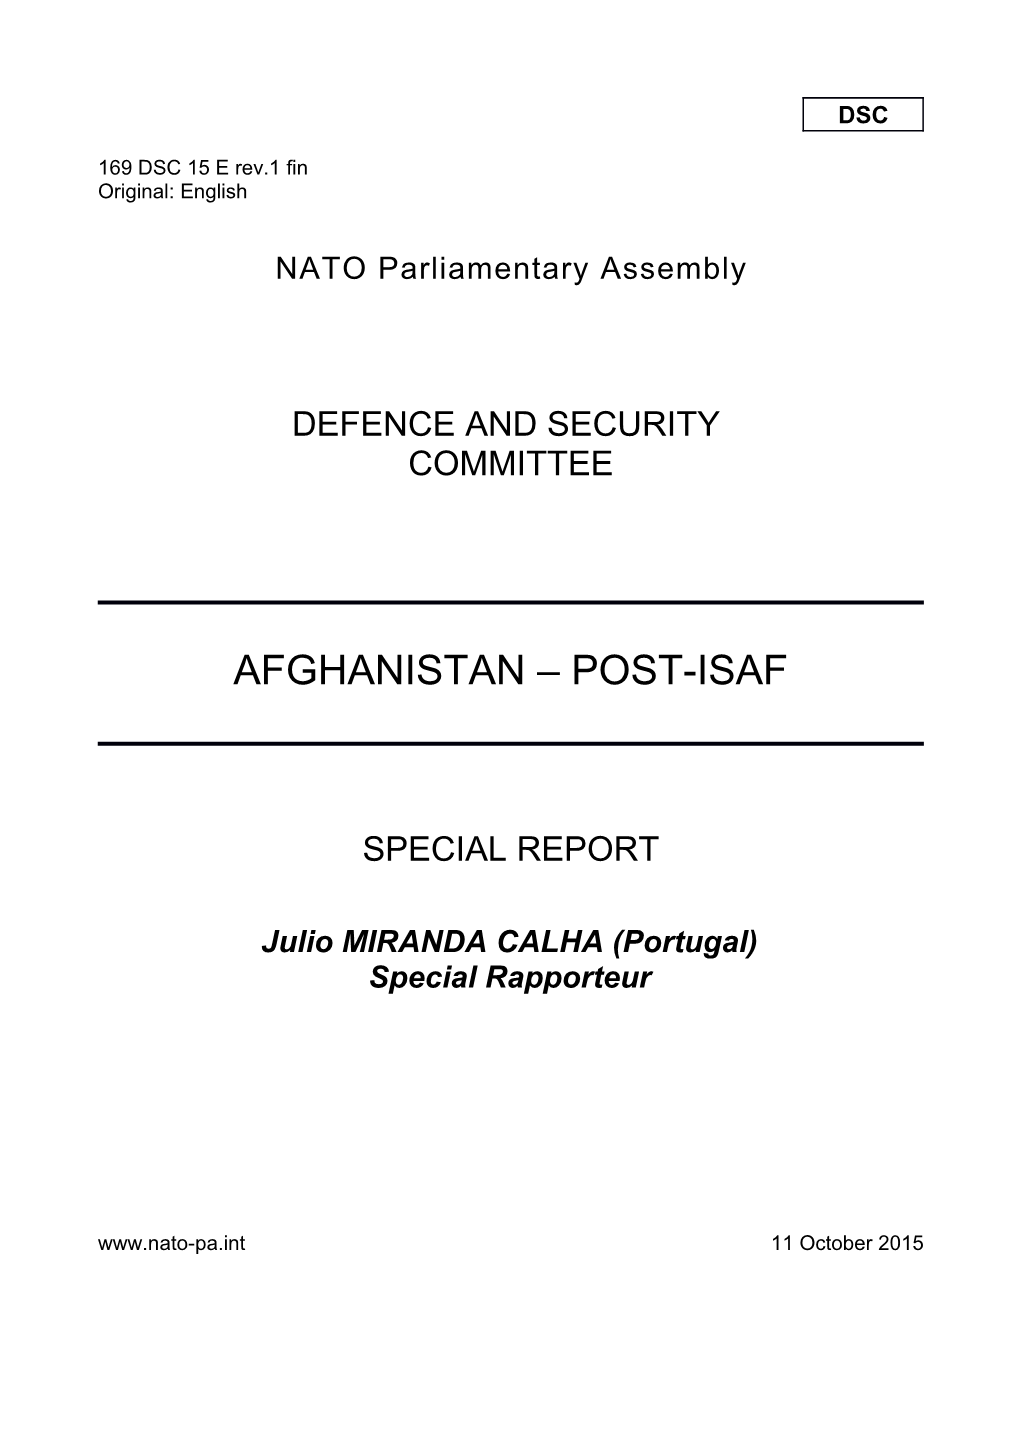 2015 DSC Draft Special Report on Afghanistan